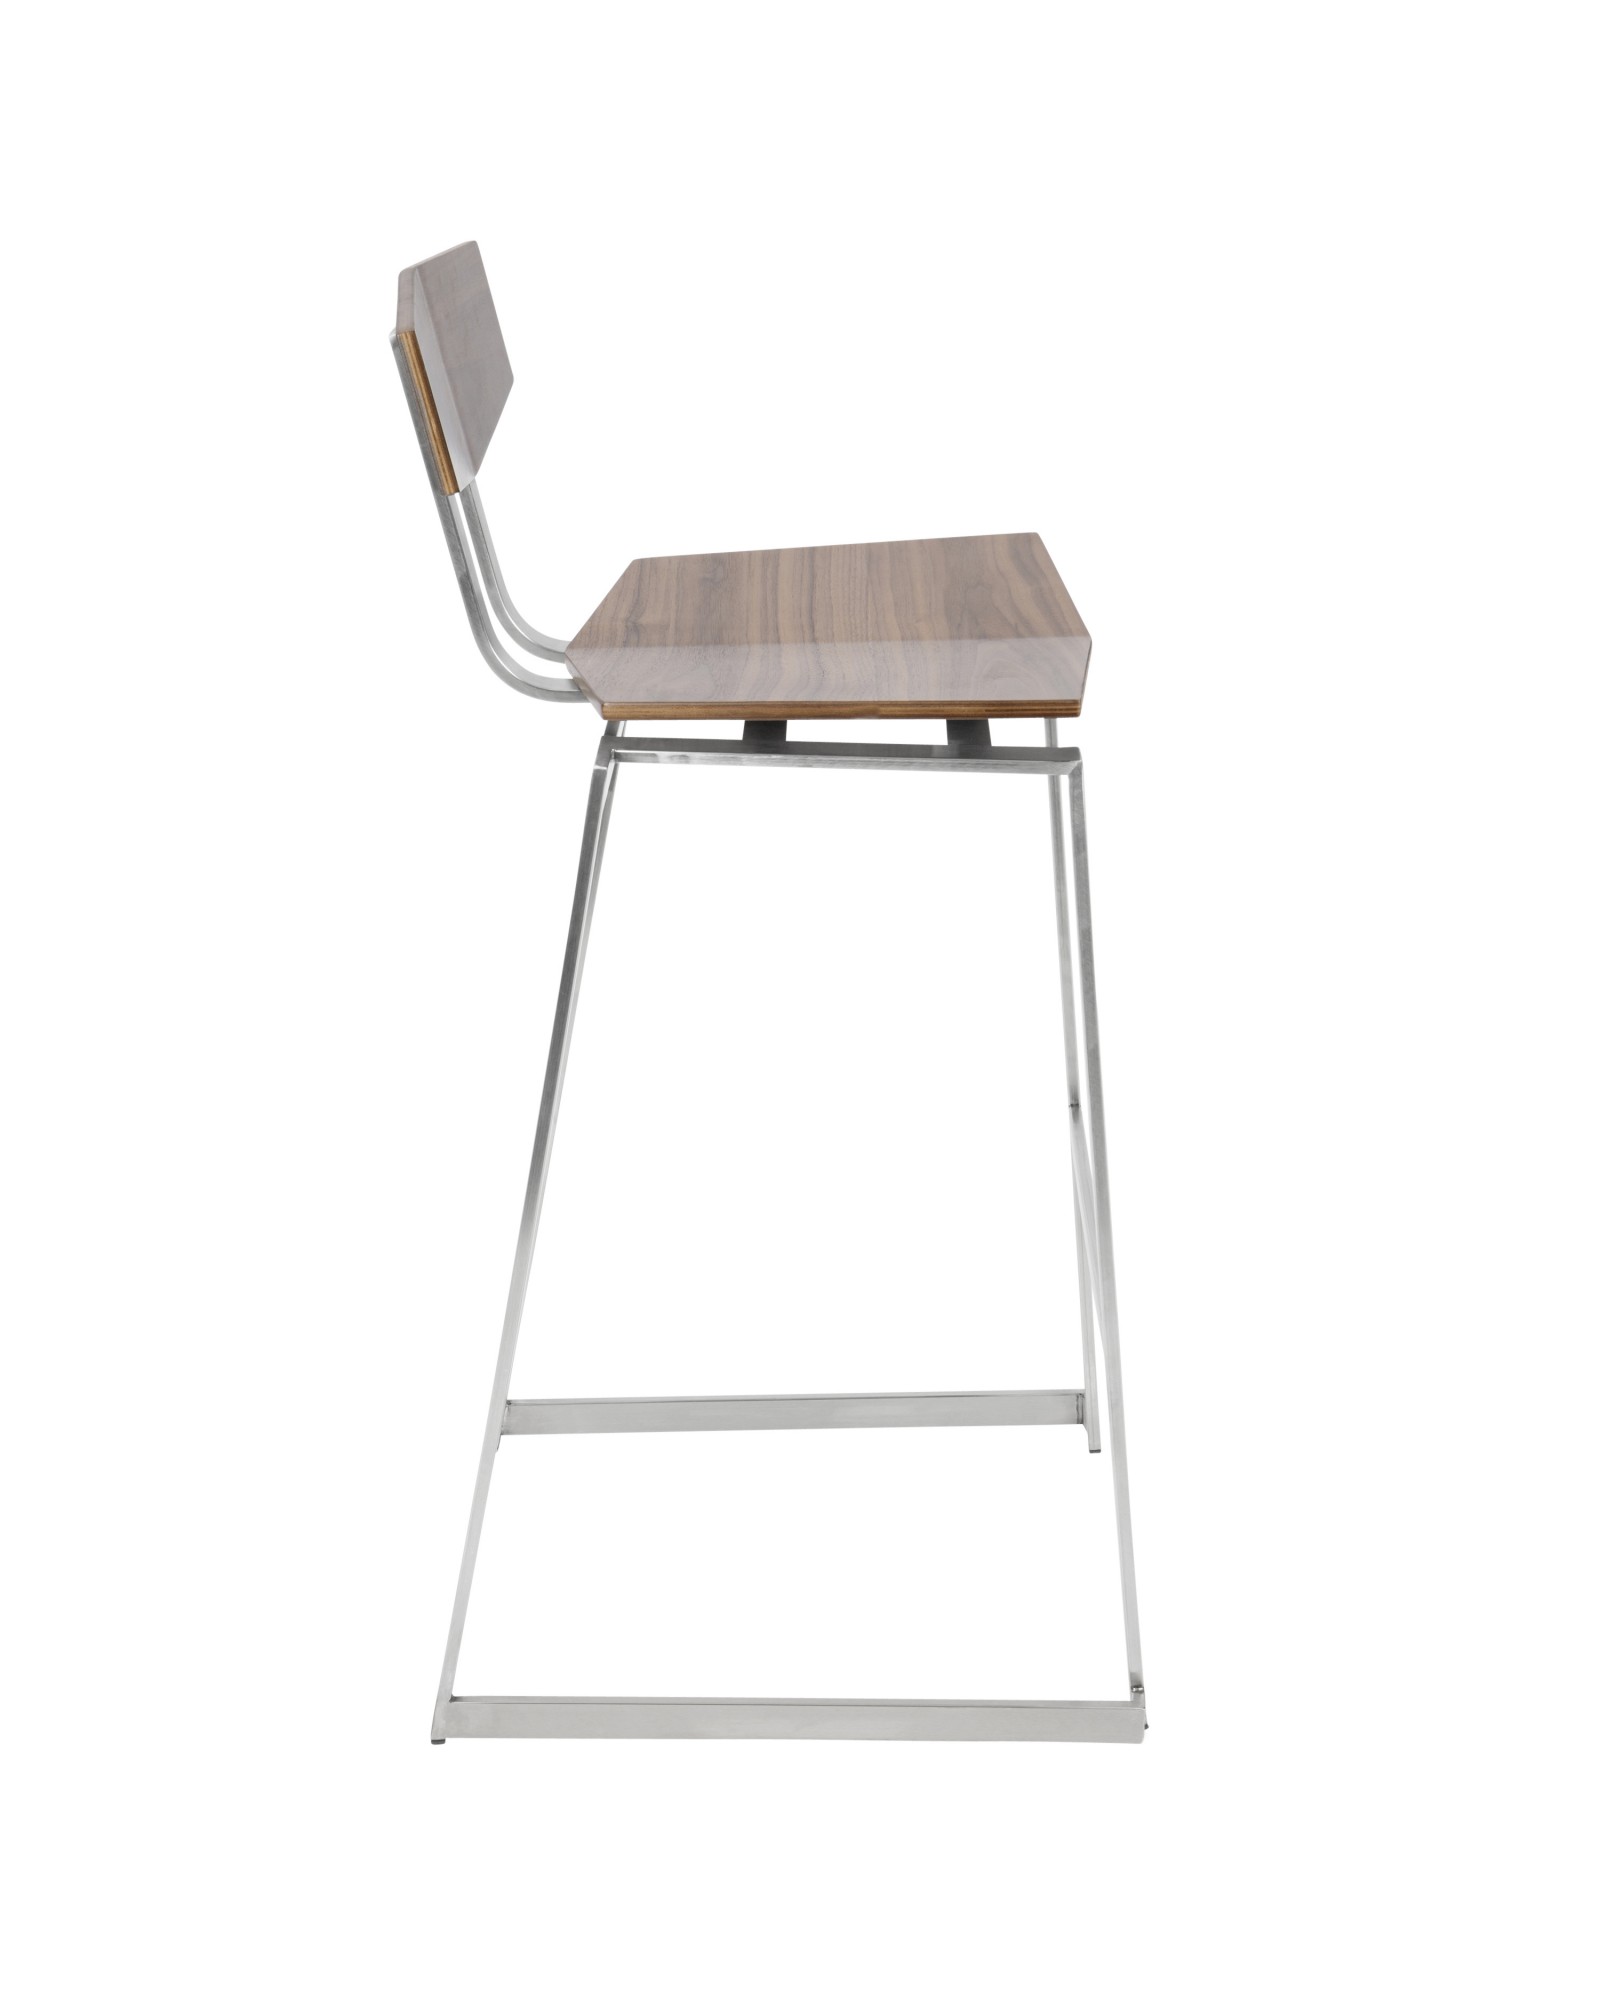 Flight Contemporary Stainless Steel Barstool in Walnut Wood - Set of 2